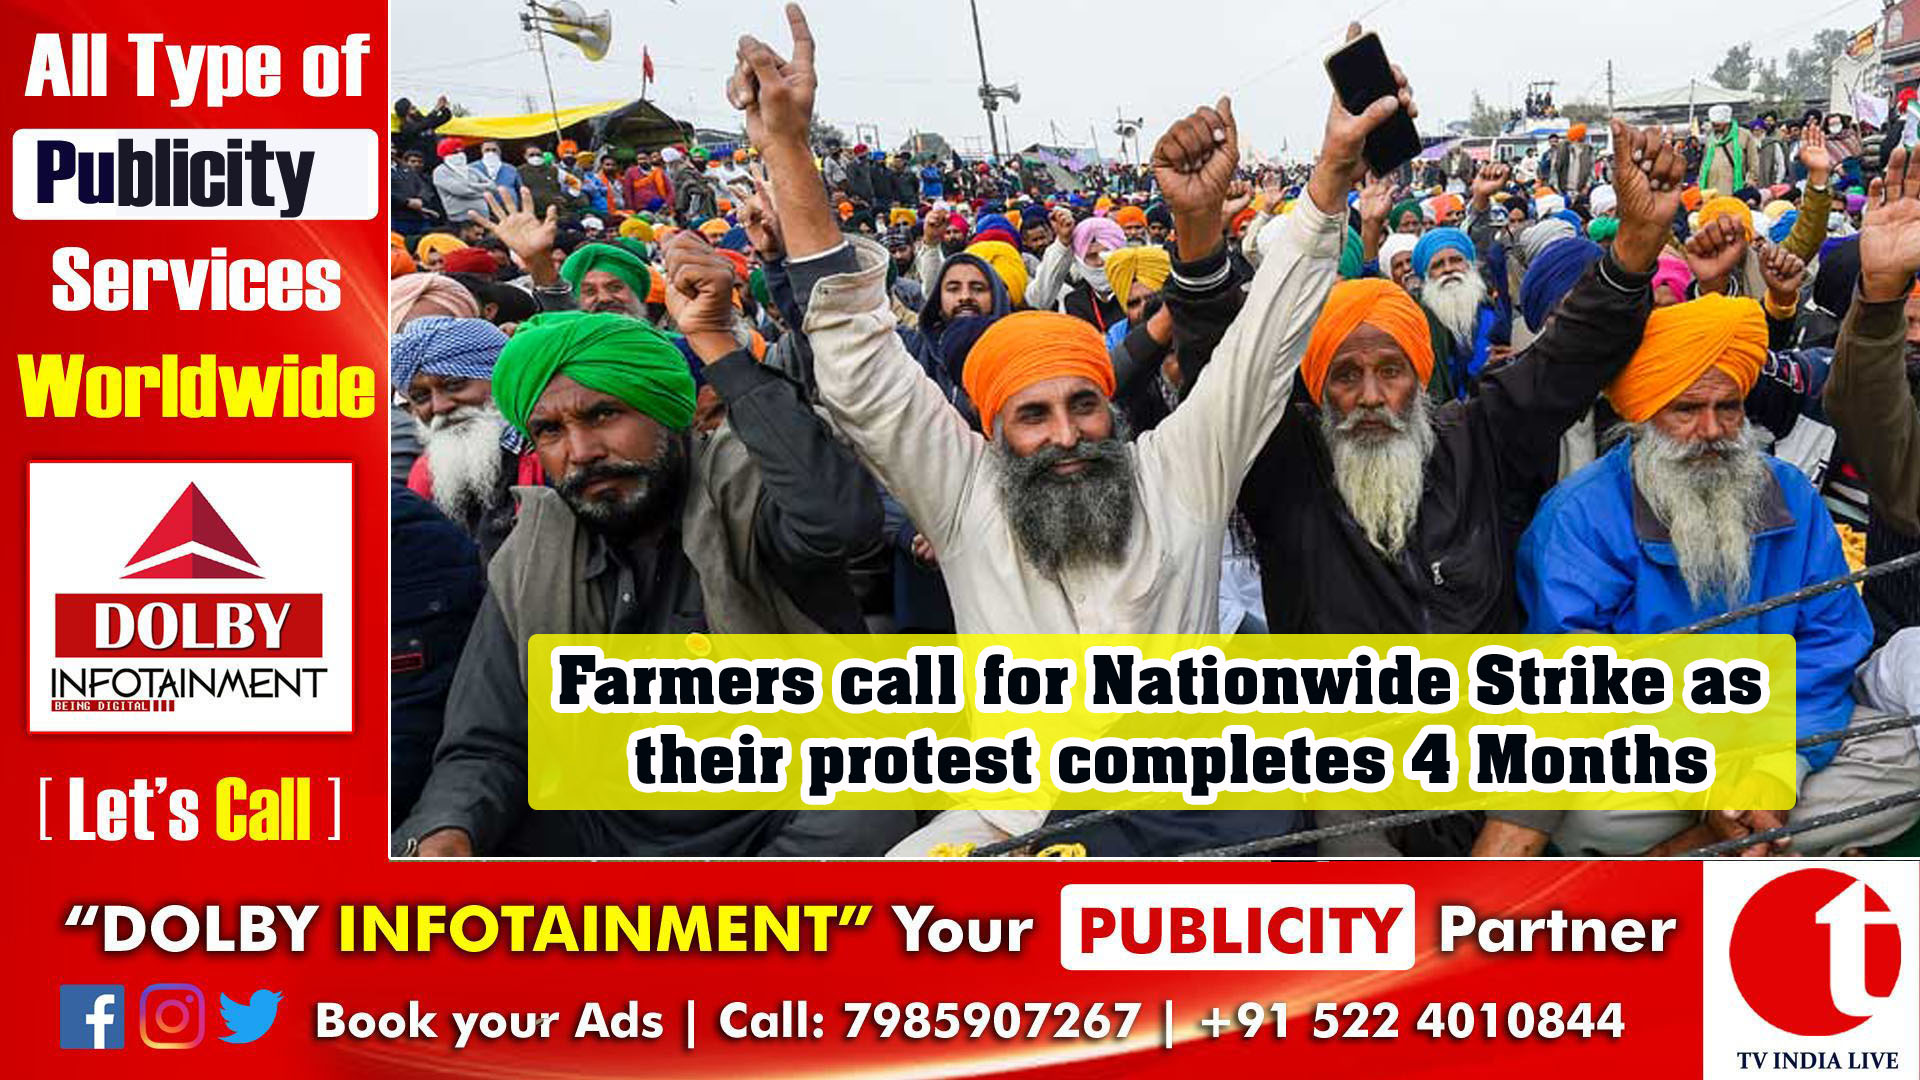 Farmers call for Nationwide Strike as their protest completes 4 Months